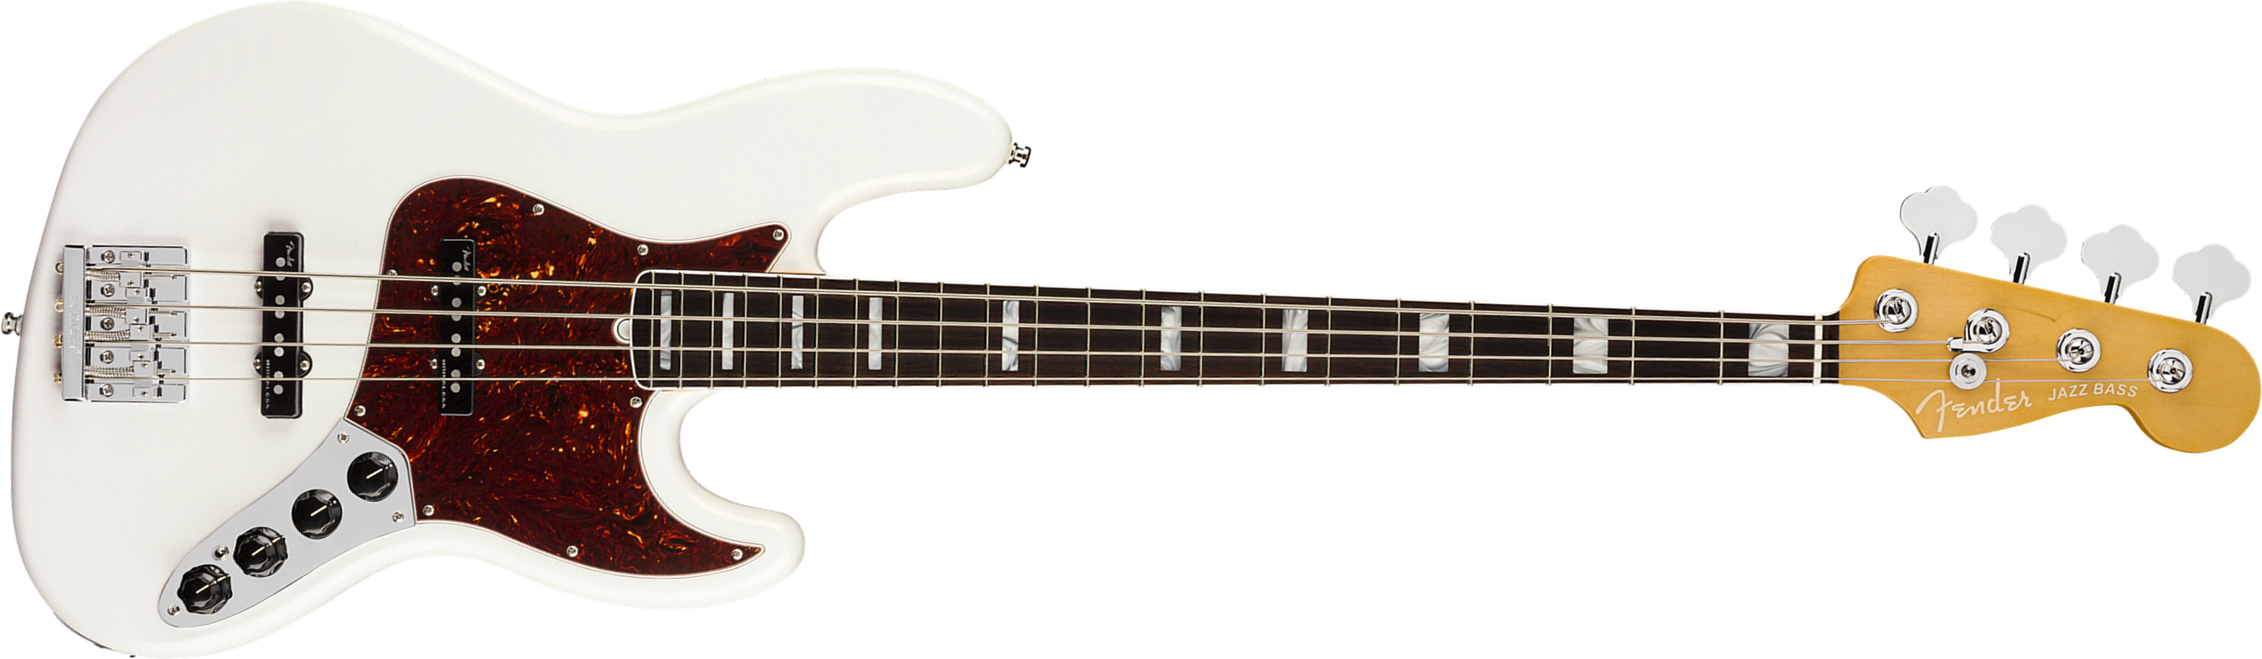 Fender Jazz Bass American Ultra 2019 Usa Rw - Arctic Pearl - Solid body elektrische bas - Main picture